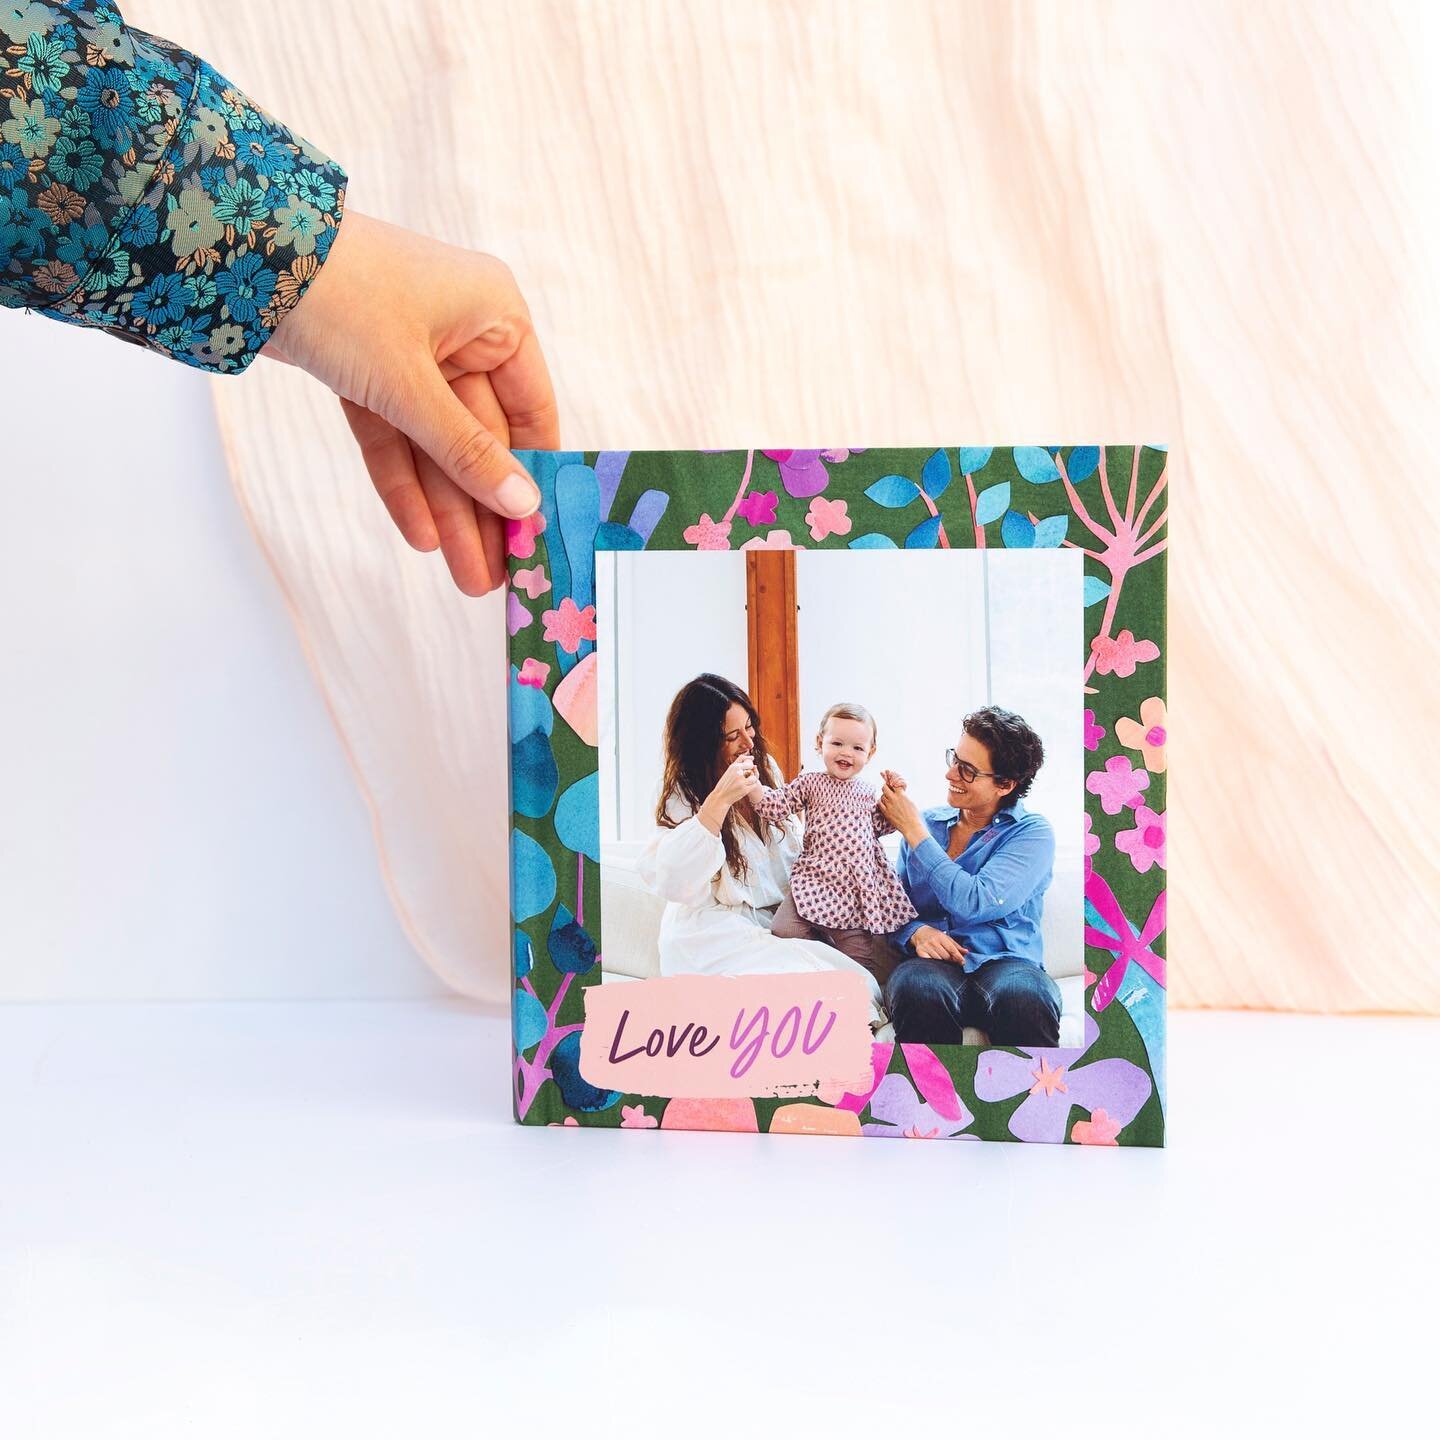 My latest photobook with @mixbook is now available 💕🌿🌸
Hope you love it! 
Thanks for having me again @mixbook 🤗 
Head to their site to make your own photo memory book now! Xx